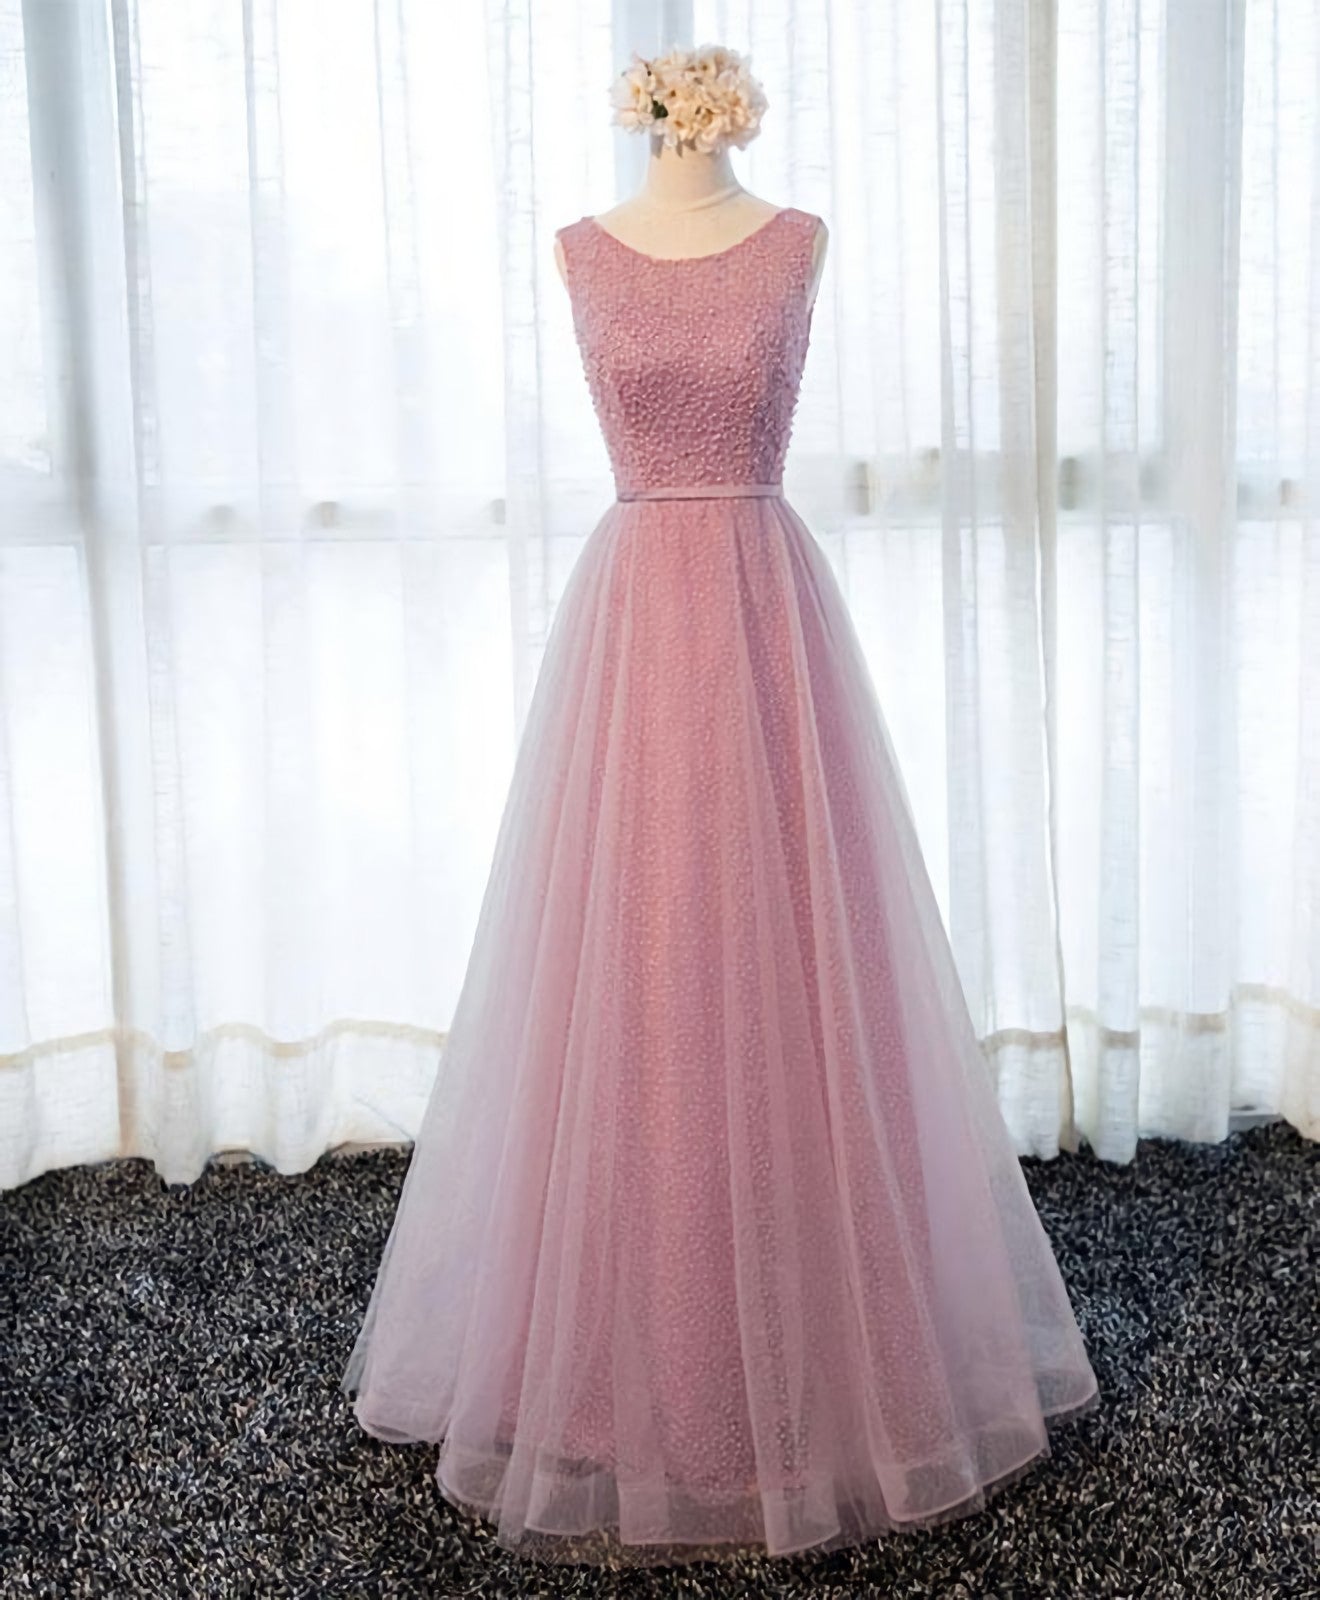 A Line Round Neck Tulle Long Corset Prom Dress, Lace Evening Dress outfit, Homecoming Dresses Silk